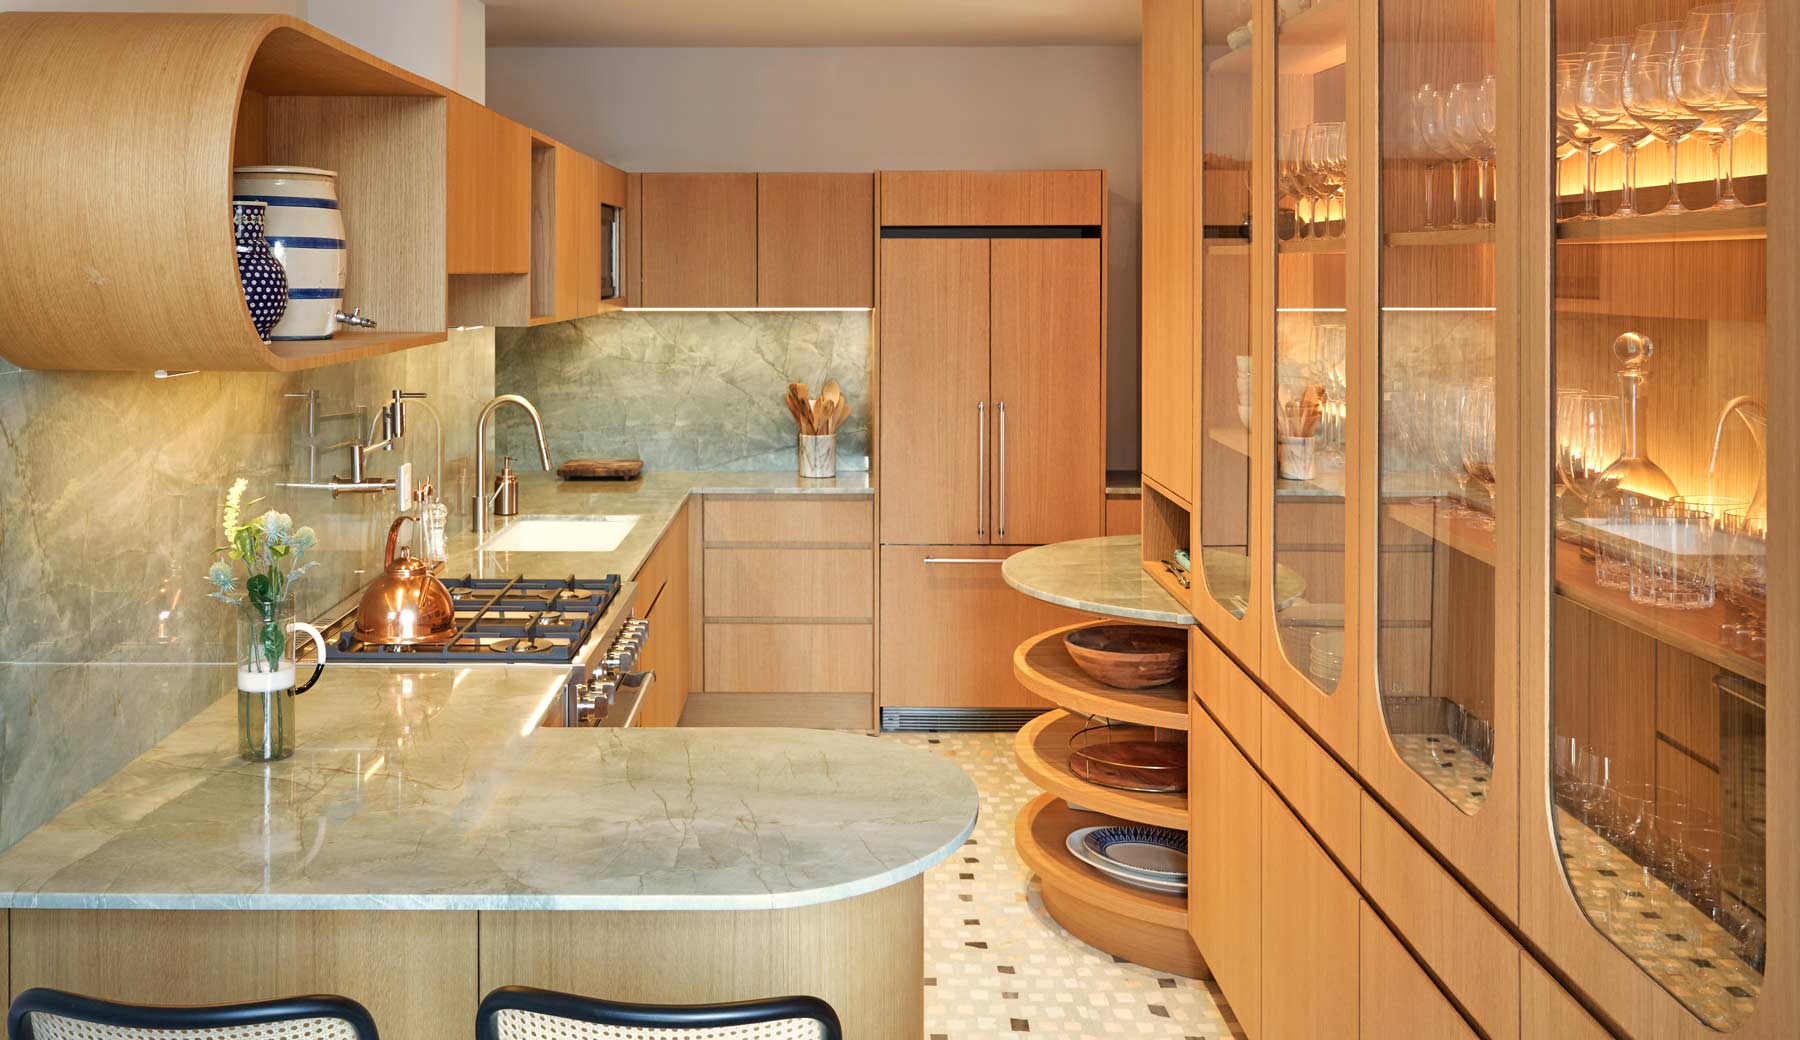 custom kitchen cabinetry millwork in upper east side apartment renovation